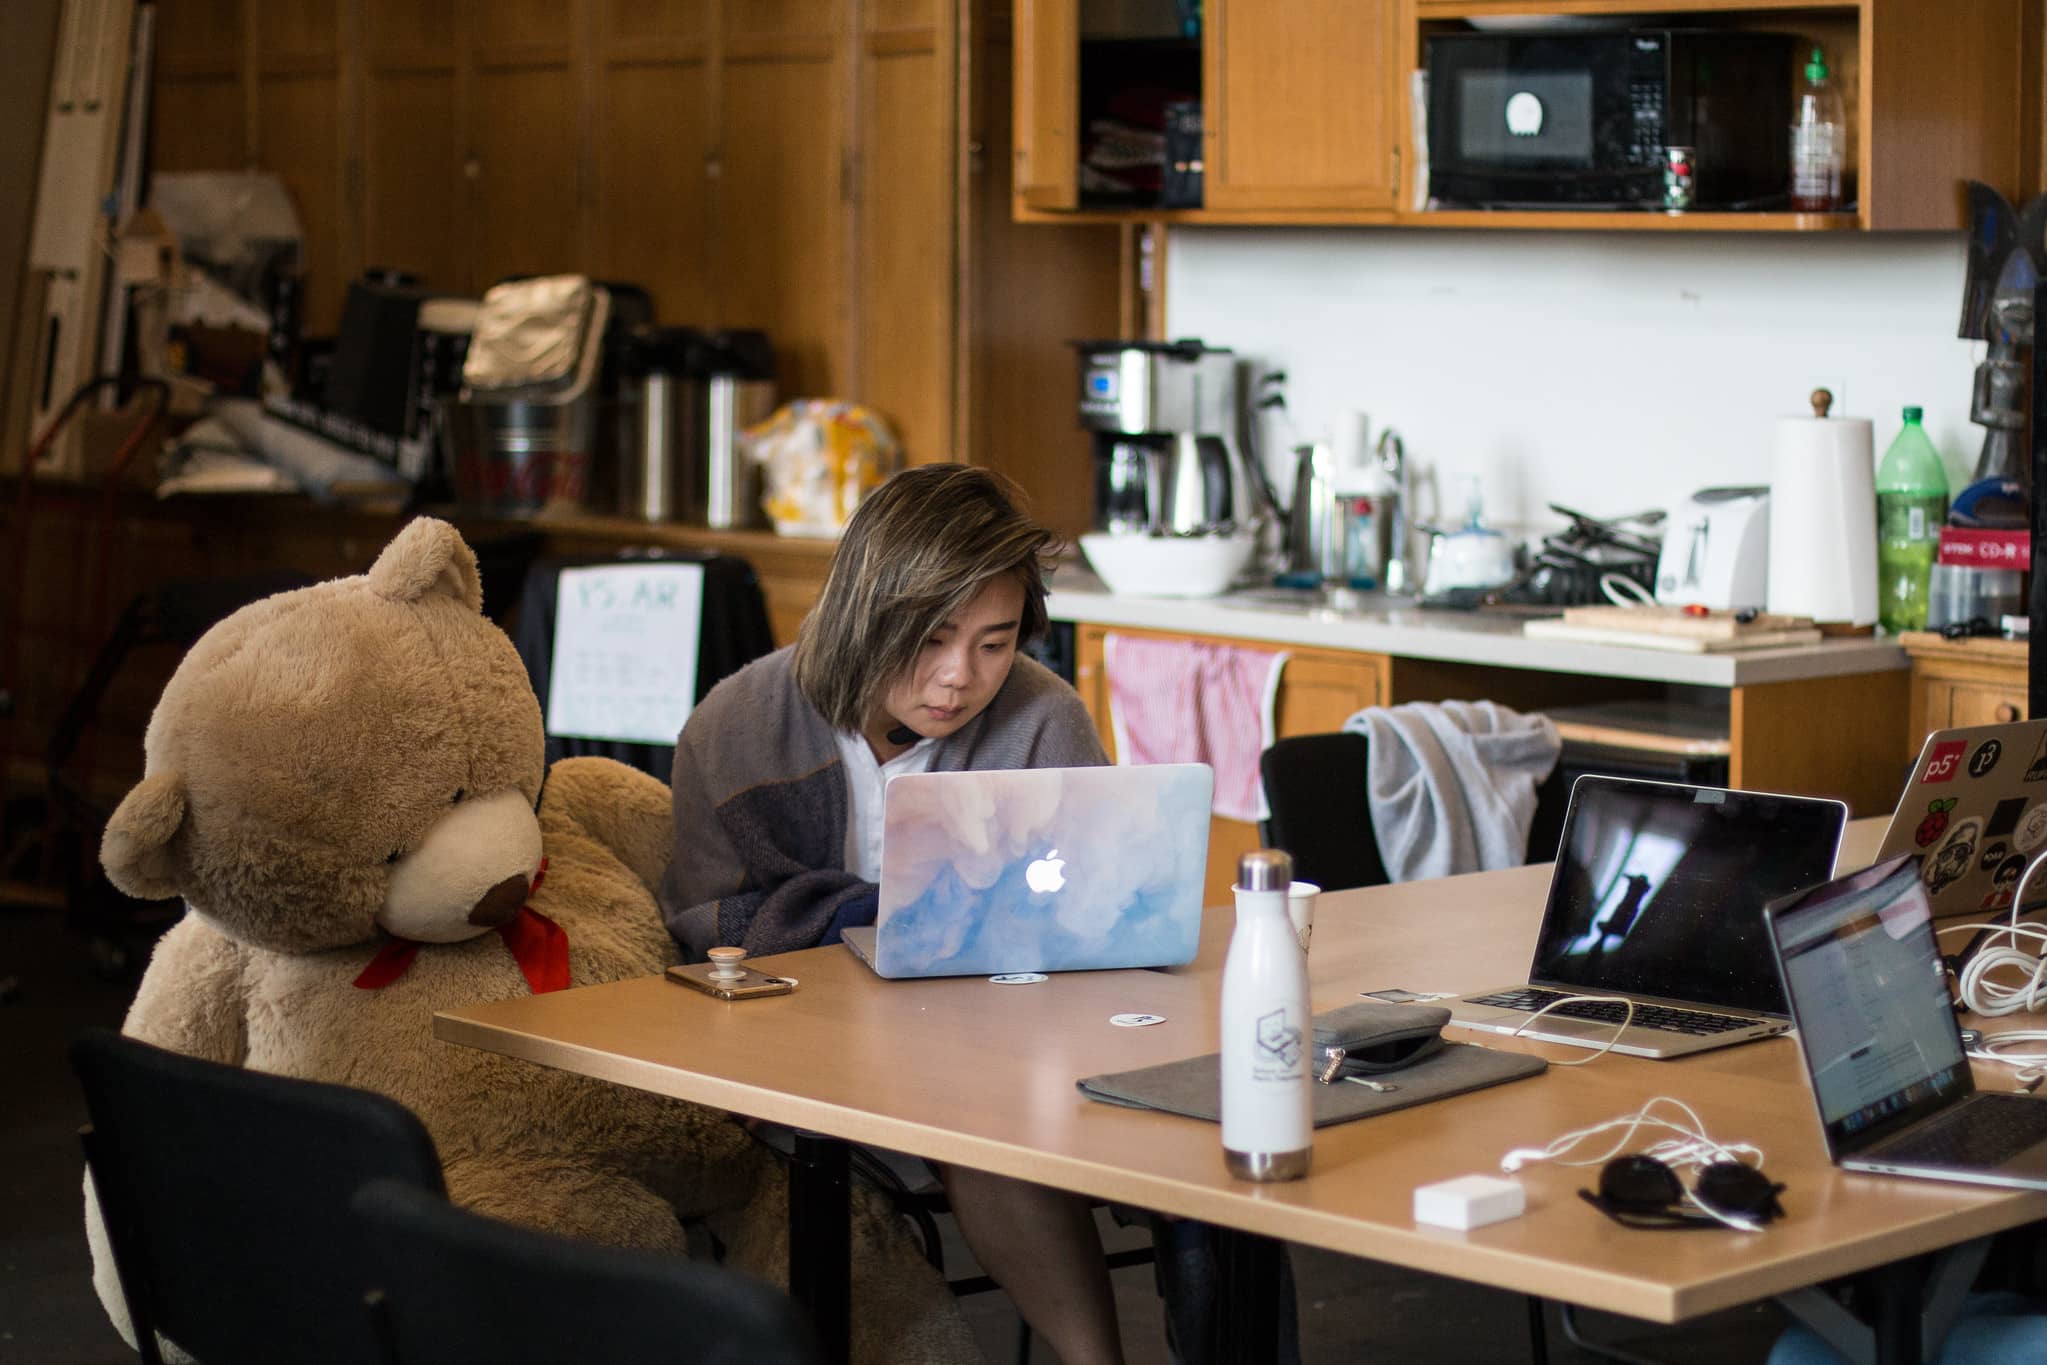 Woman sitting next to a lifesize teddy bear works on her laptop"